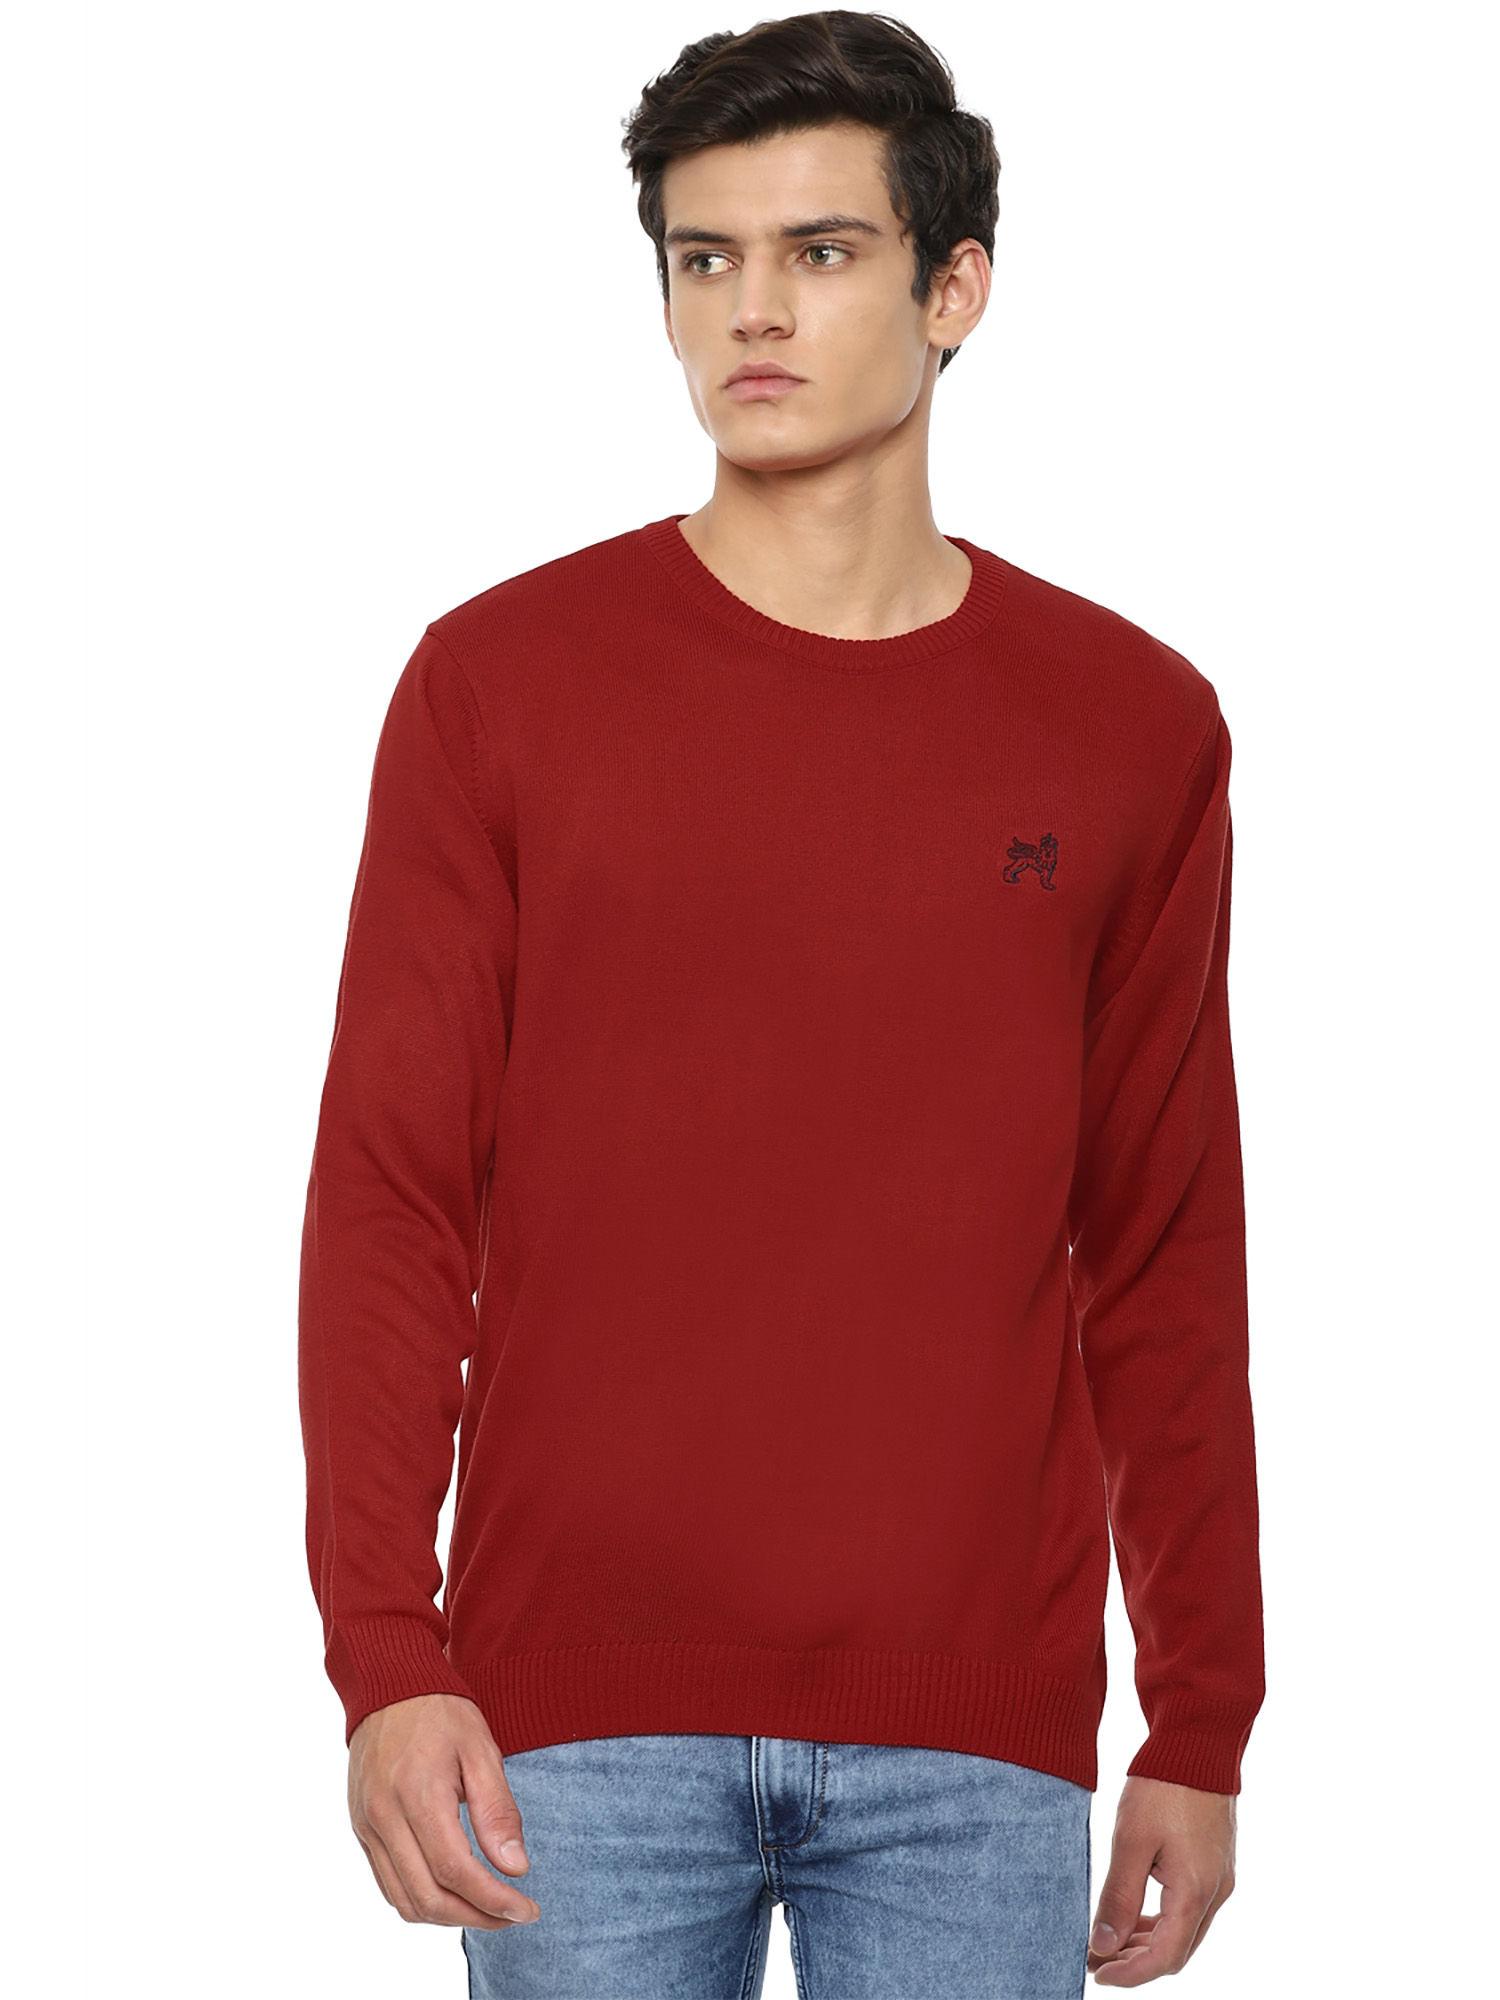 red-sweater